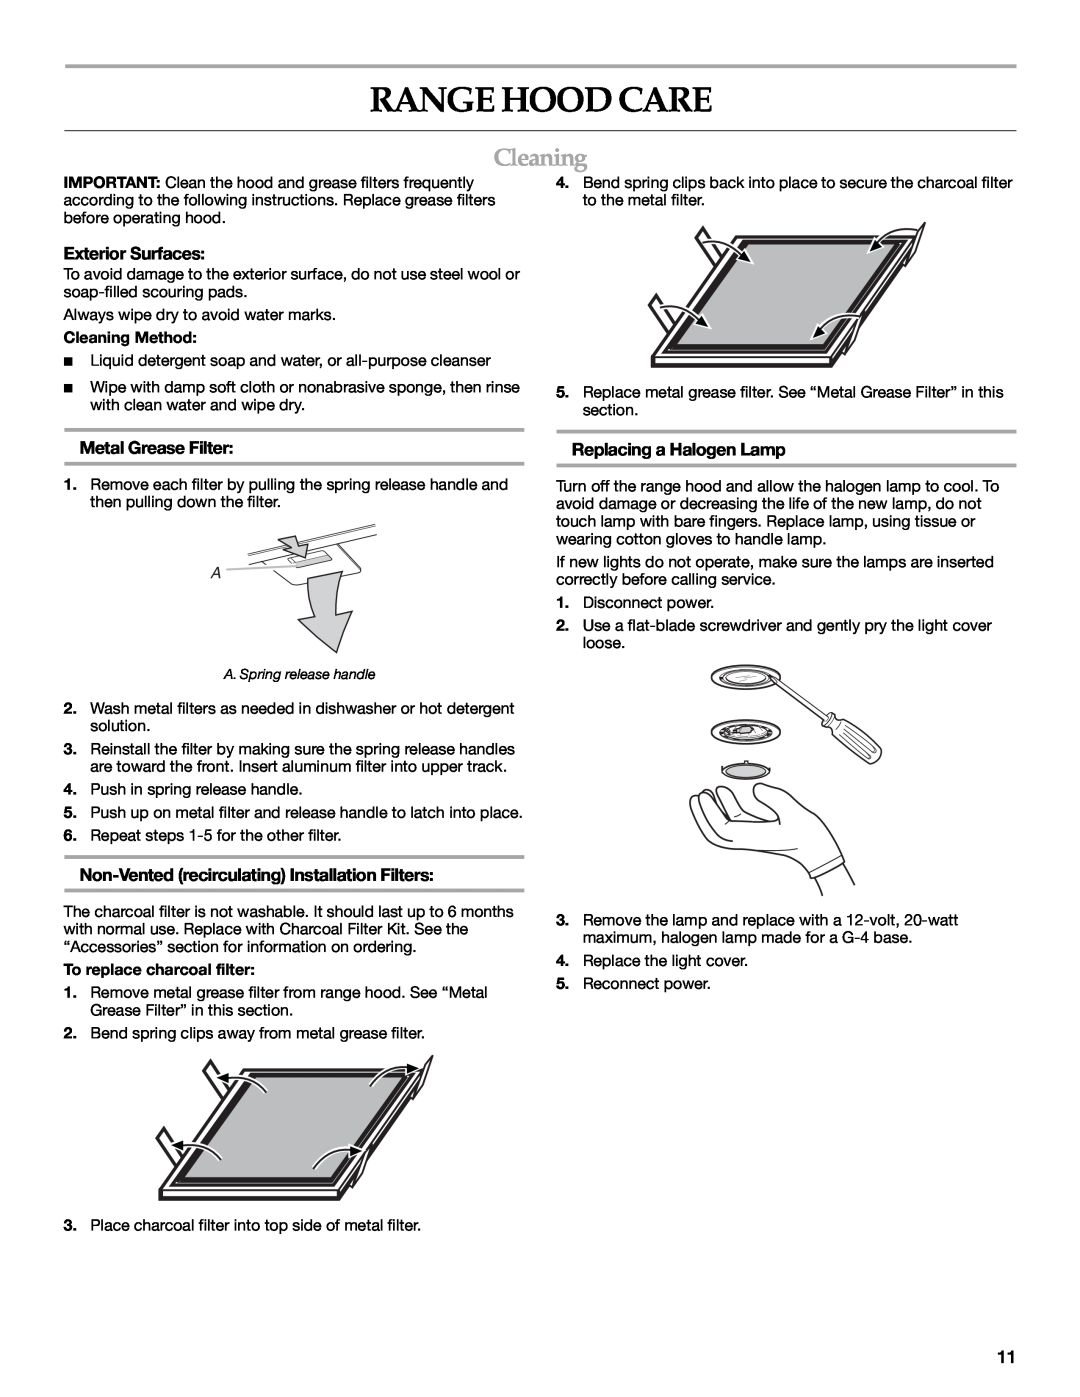 KitchenAid LI3Y7C/W10322991C Range Hood Care, Cleaning, Exterior Surfaces, Metal Grease Filter, Replacing a Halogen Lamp 